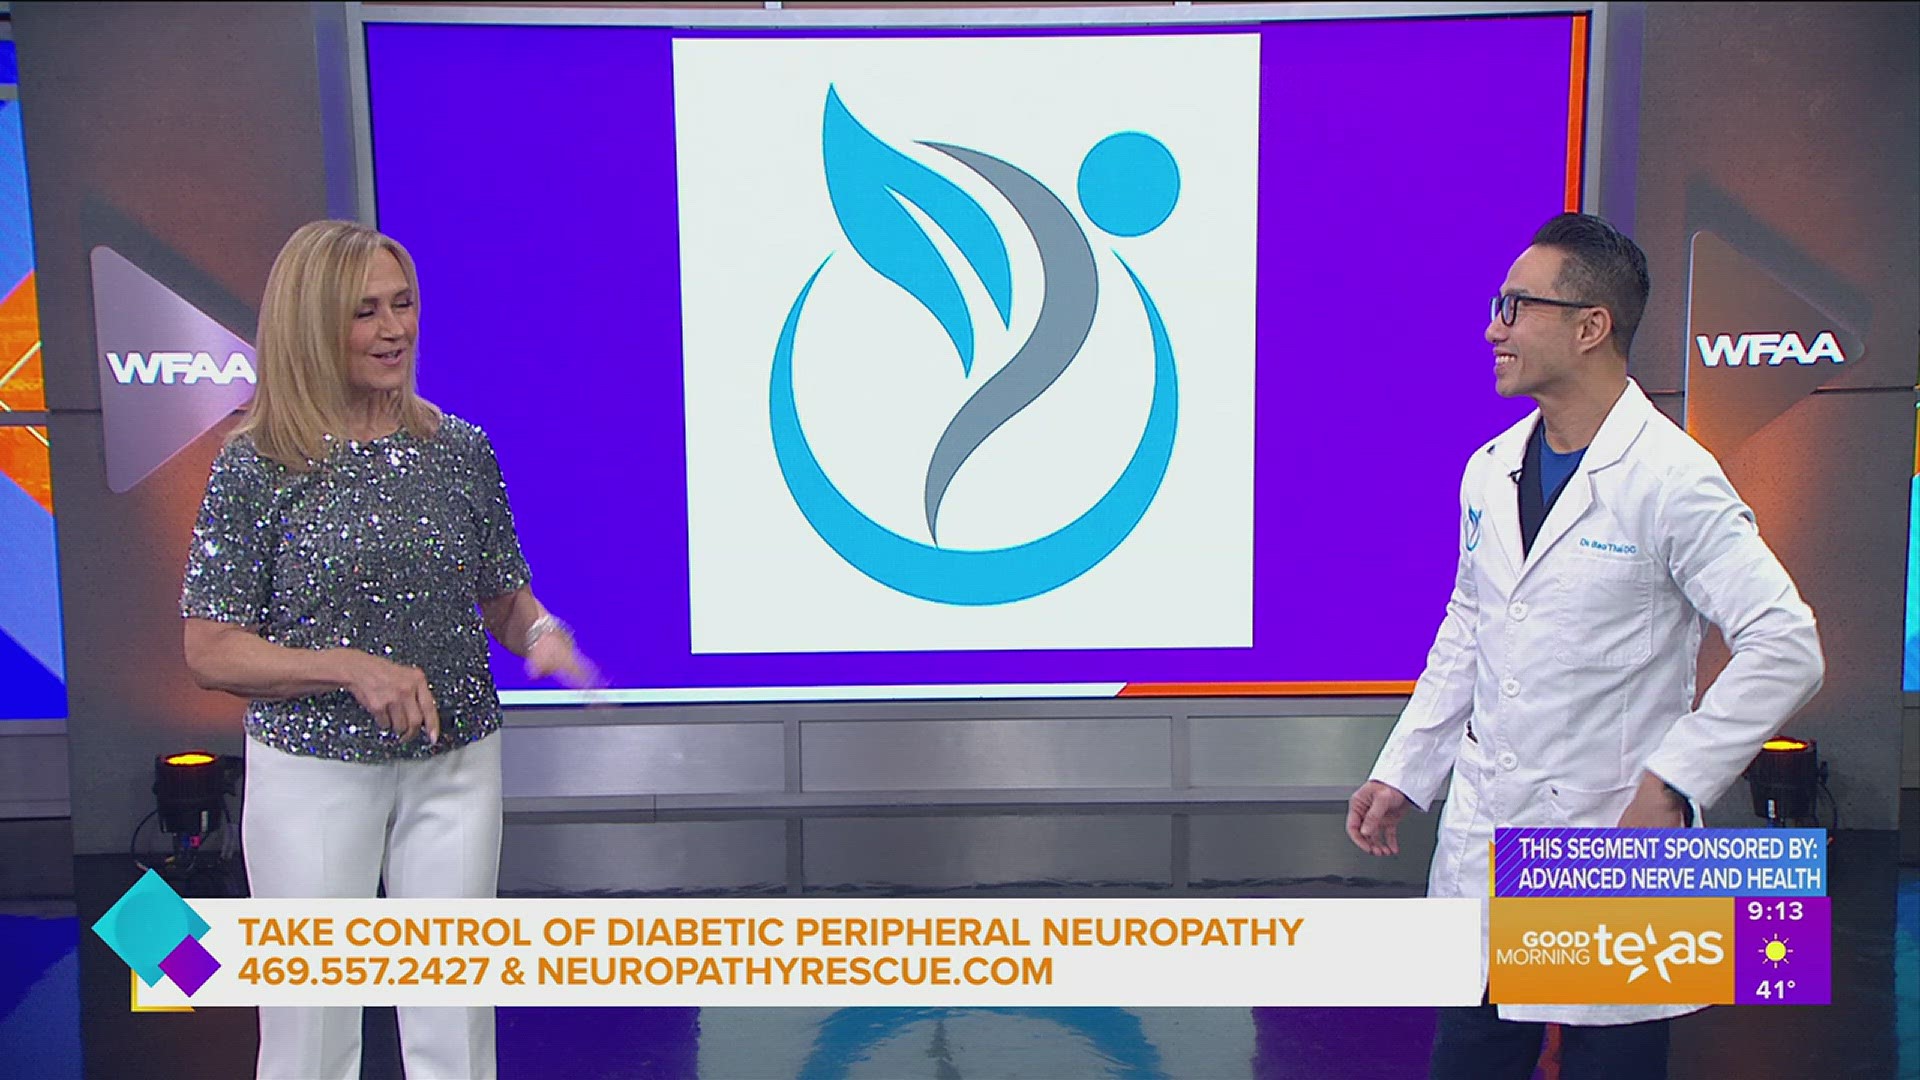 This segment is sponsored by Advanced Nerve & Health. Call 469.557.2427 or go to neuropathyrescue.com for more information.